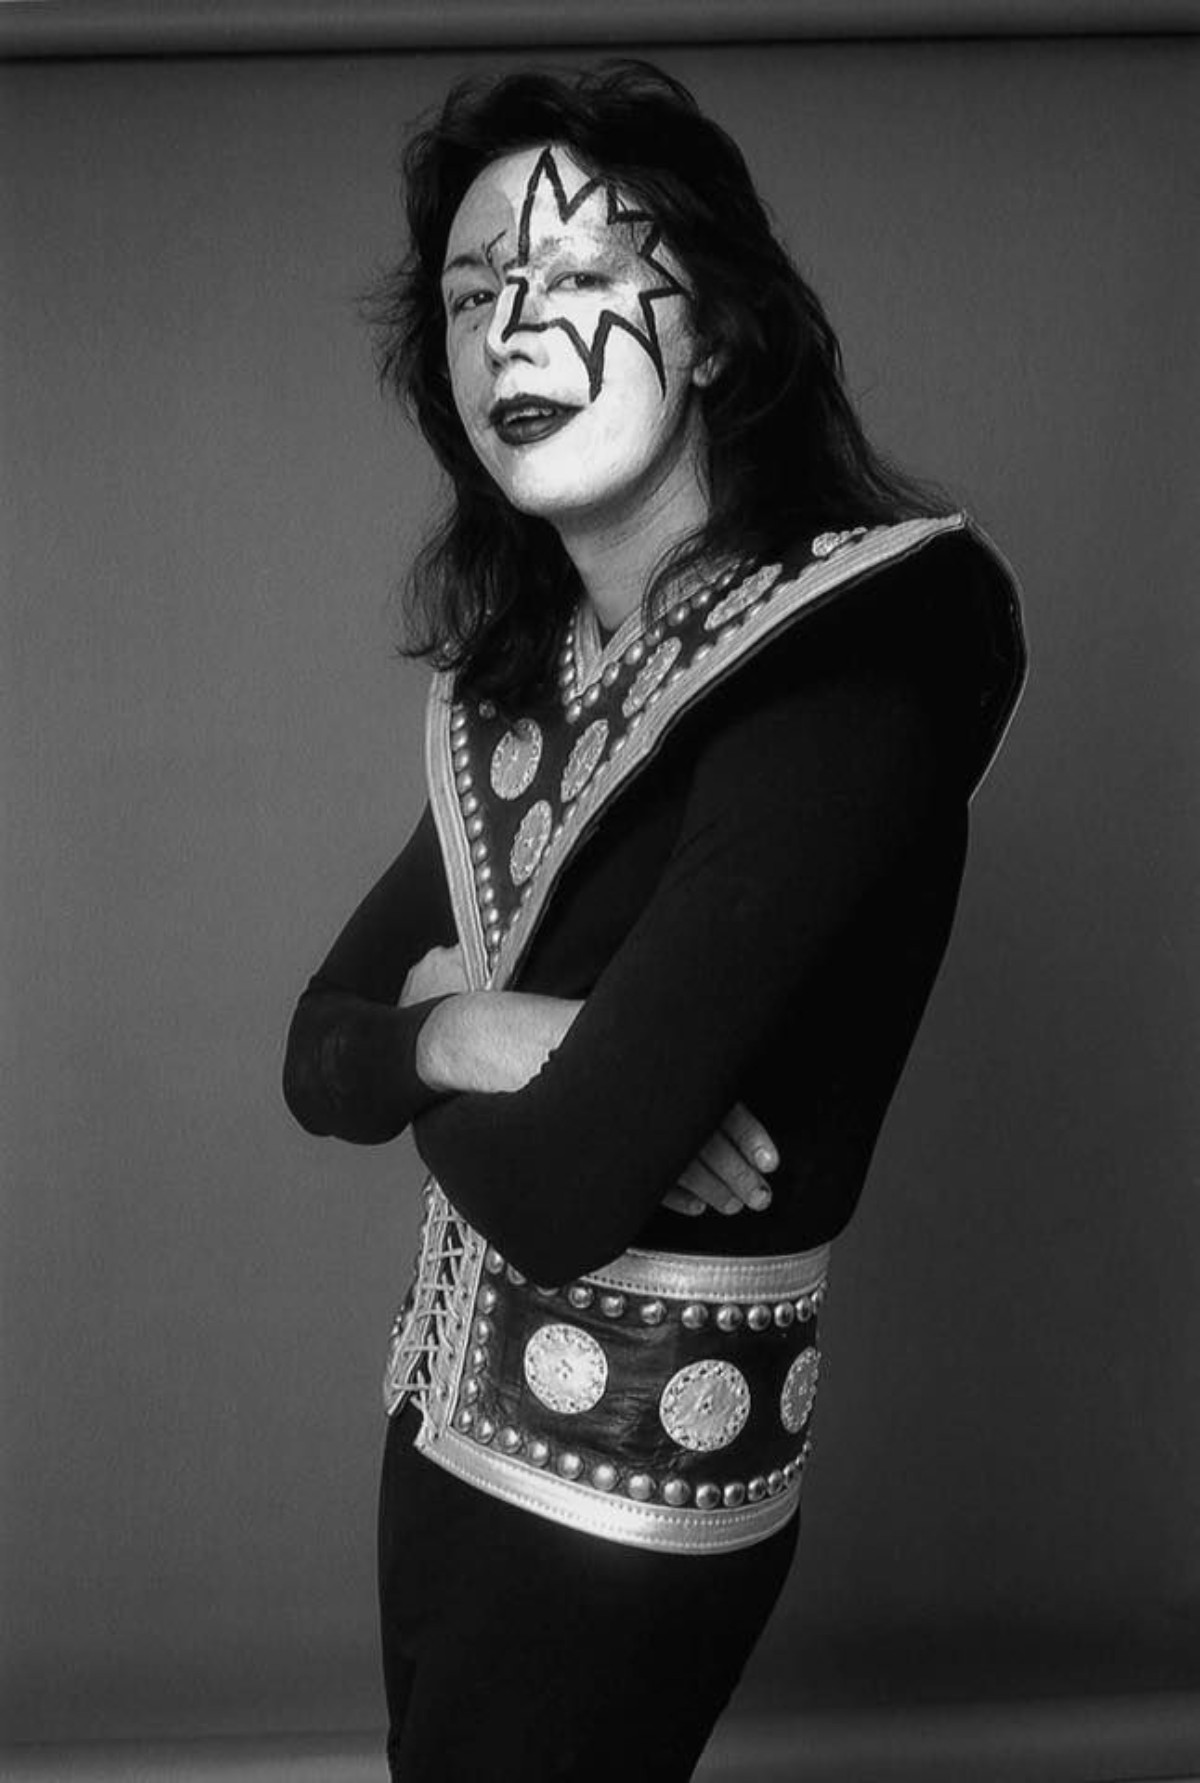 Young Ace Frehley